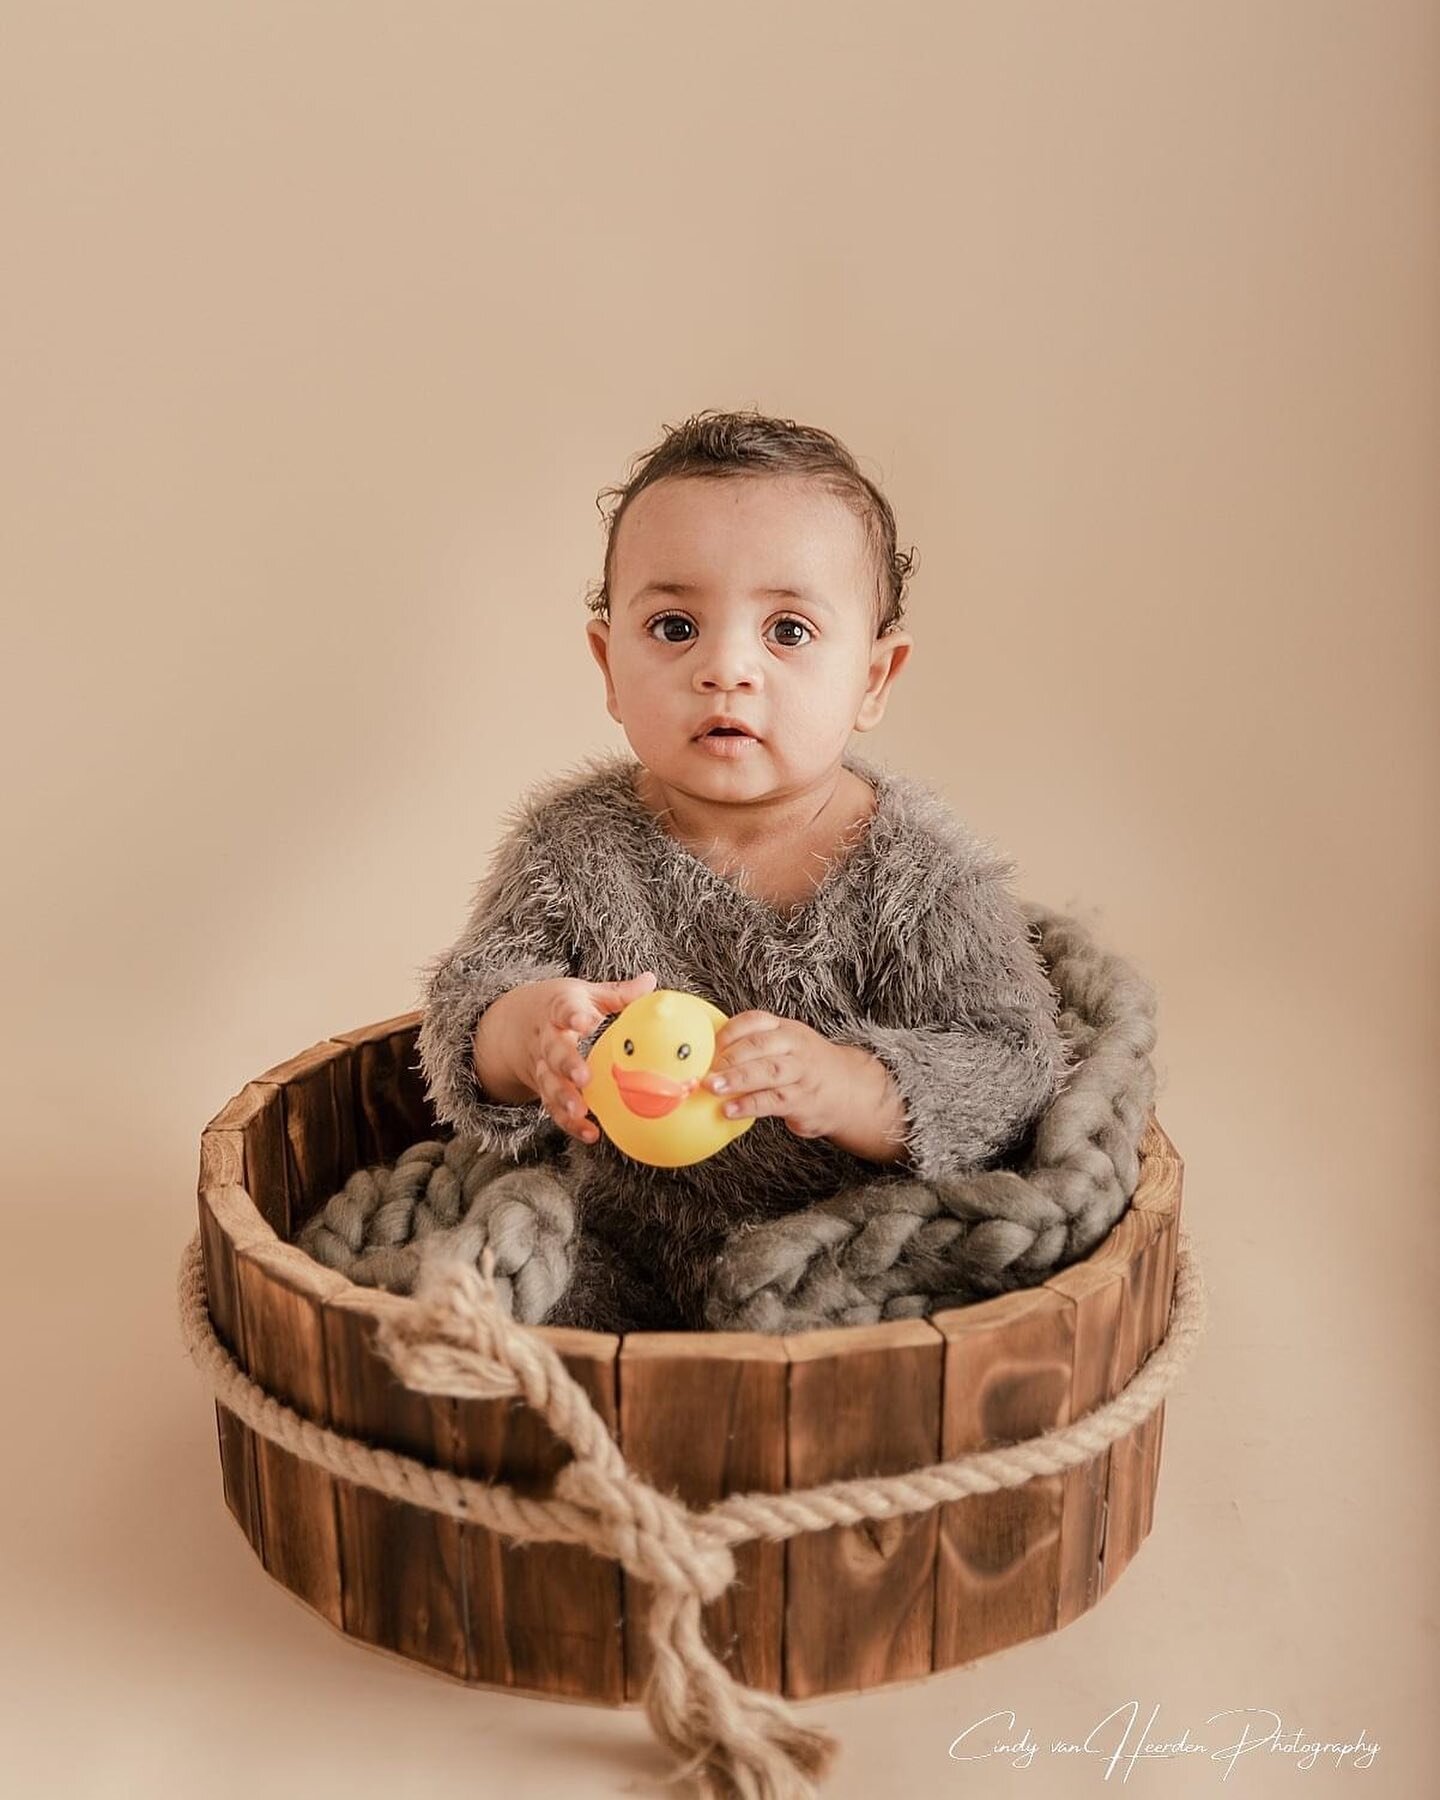 Leo | Milestone session 

Feels like yesterday we had this little mans newborn session and now he is a whole 10 months 😍

#milestonesession #babyboy #leo #childrenphotography